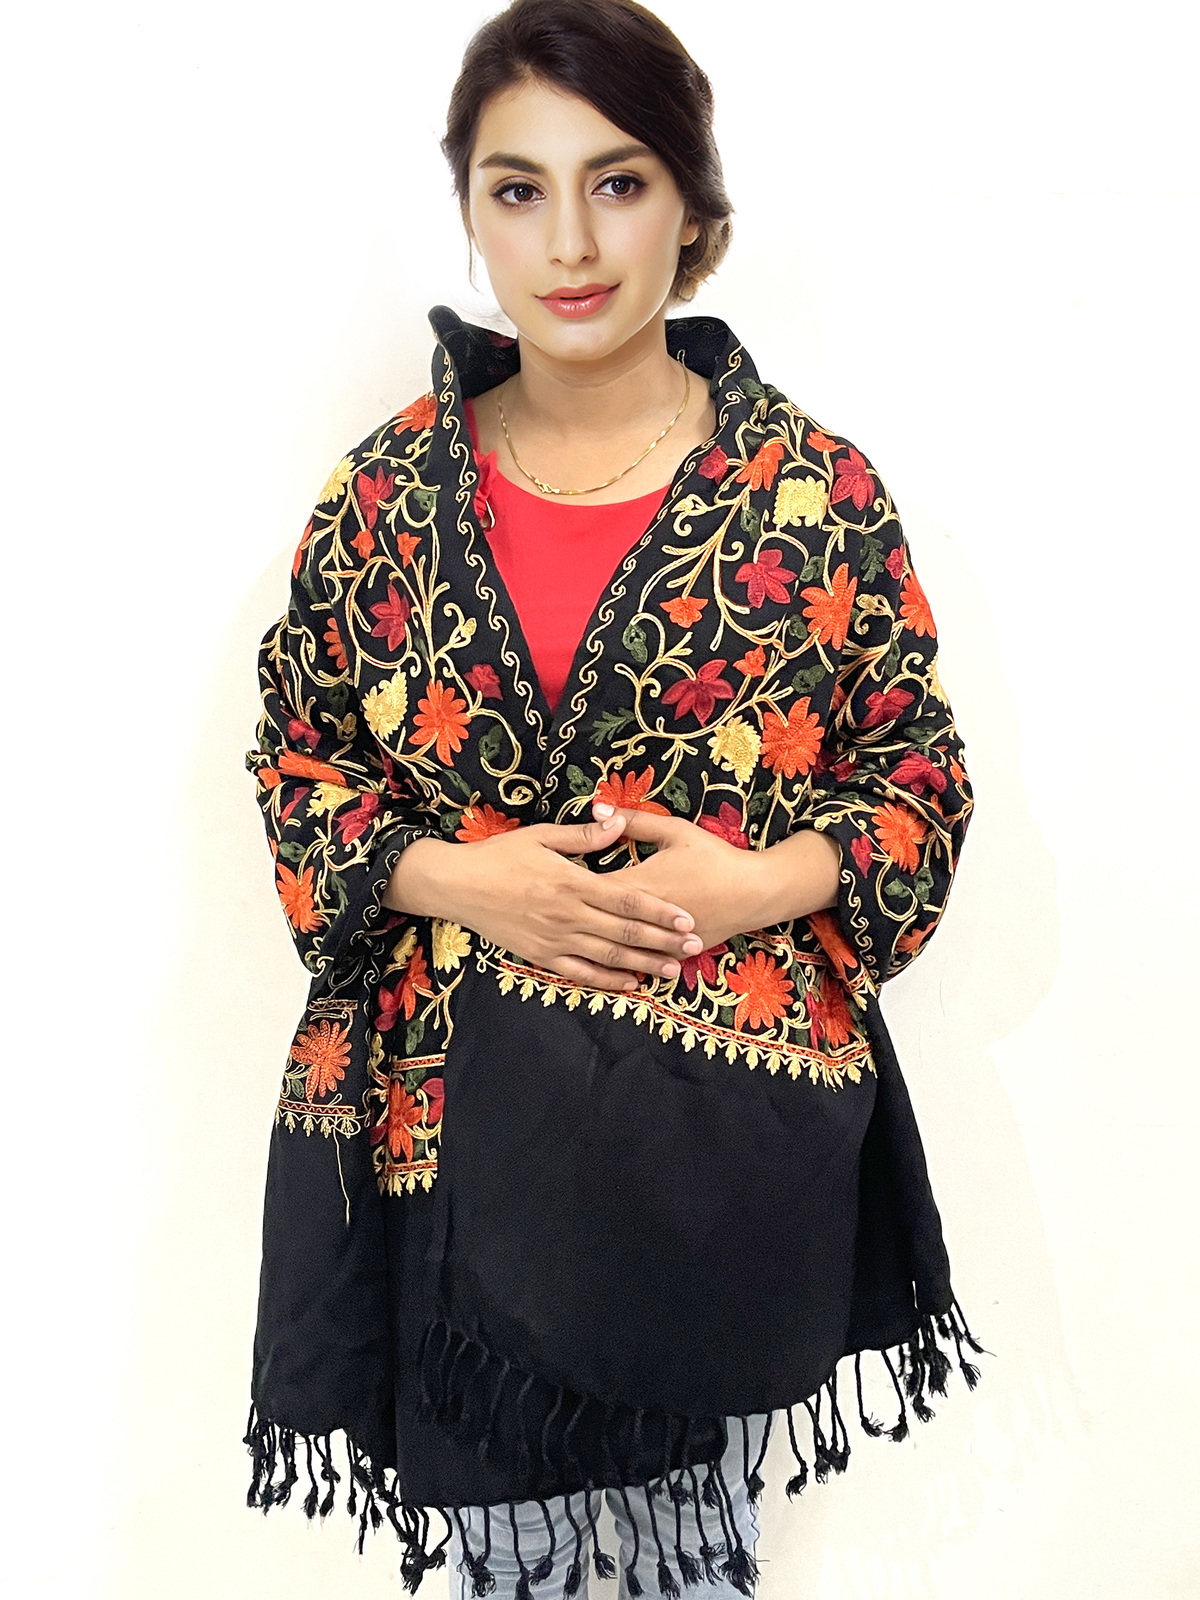 Primary image for Women's Kashmiri Black Color Stole Ethnic Flower Embroidered Wool Shawl Cashmere